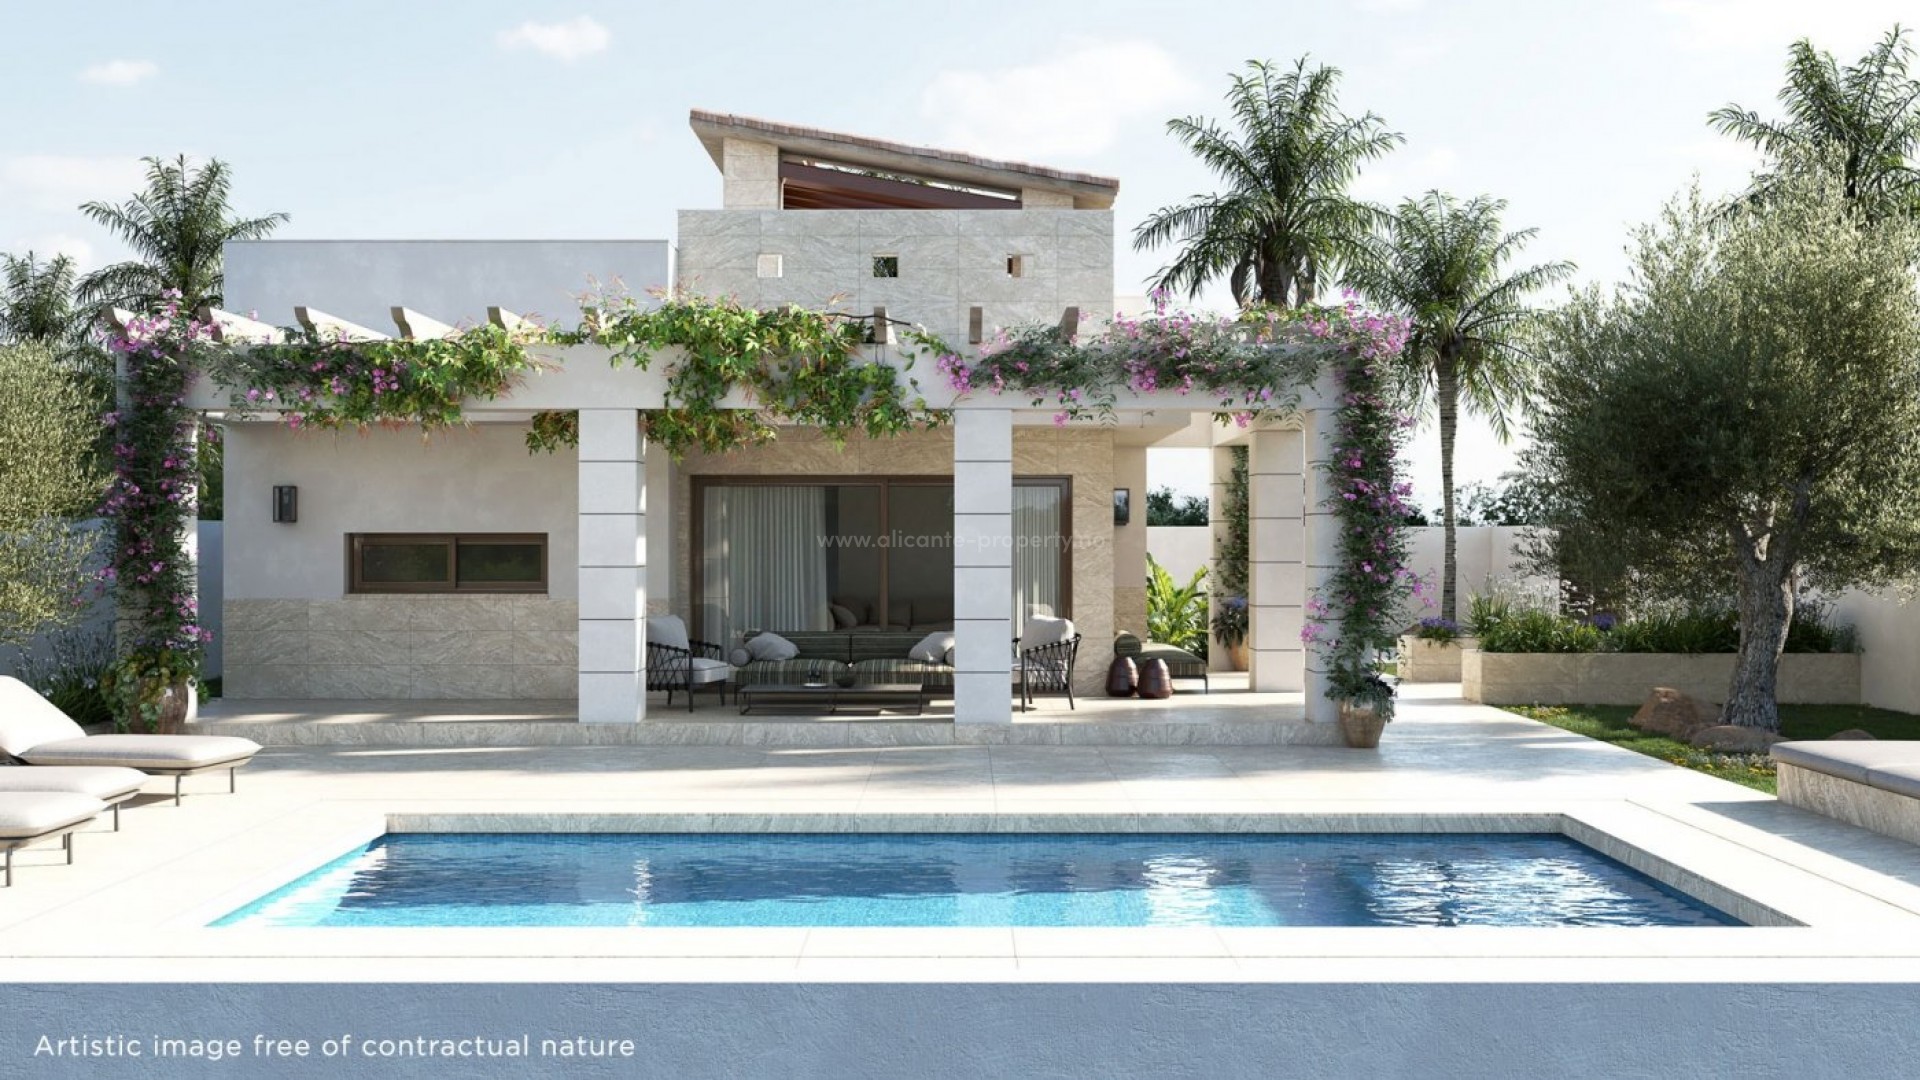 New beautiful houses/villas in Rojales, 3 bedrooms, 2 bathrooms, garden w/pool, solarium, just 2 minutes from La Marquesa Golf, town center 10 minutes away.